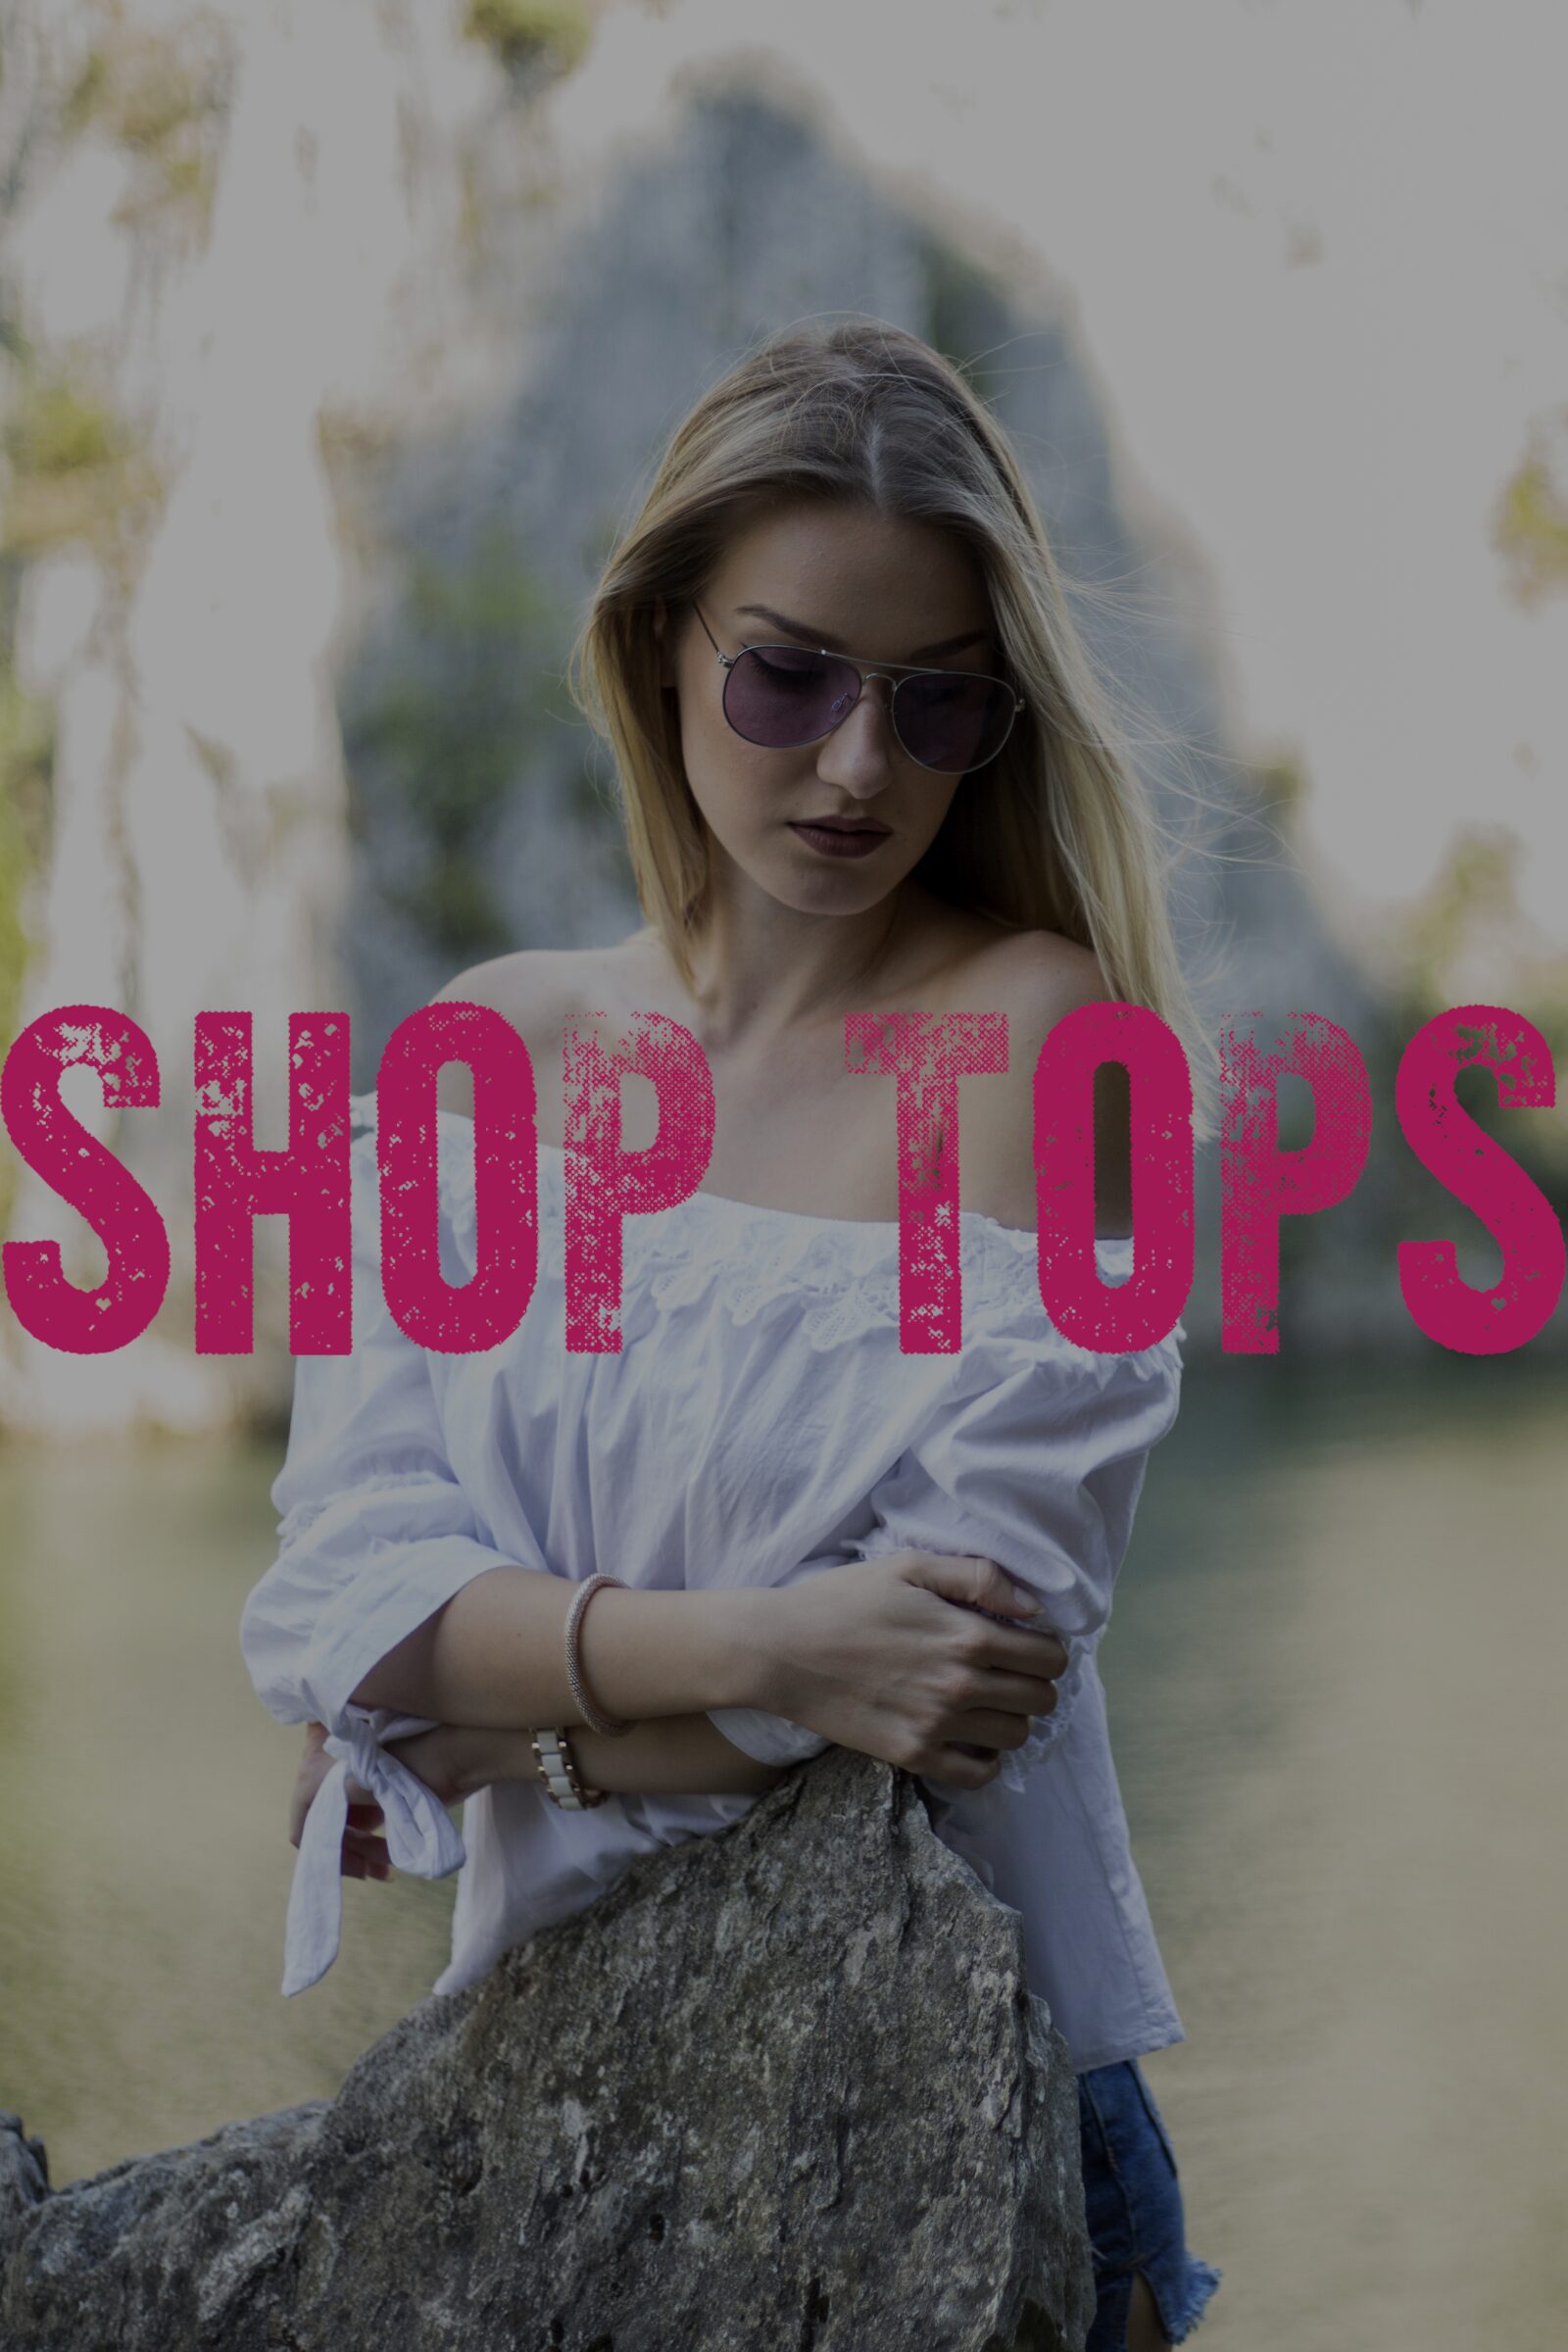 Shop Tops - Dash Outfitters